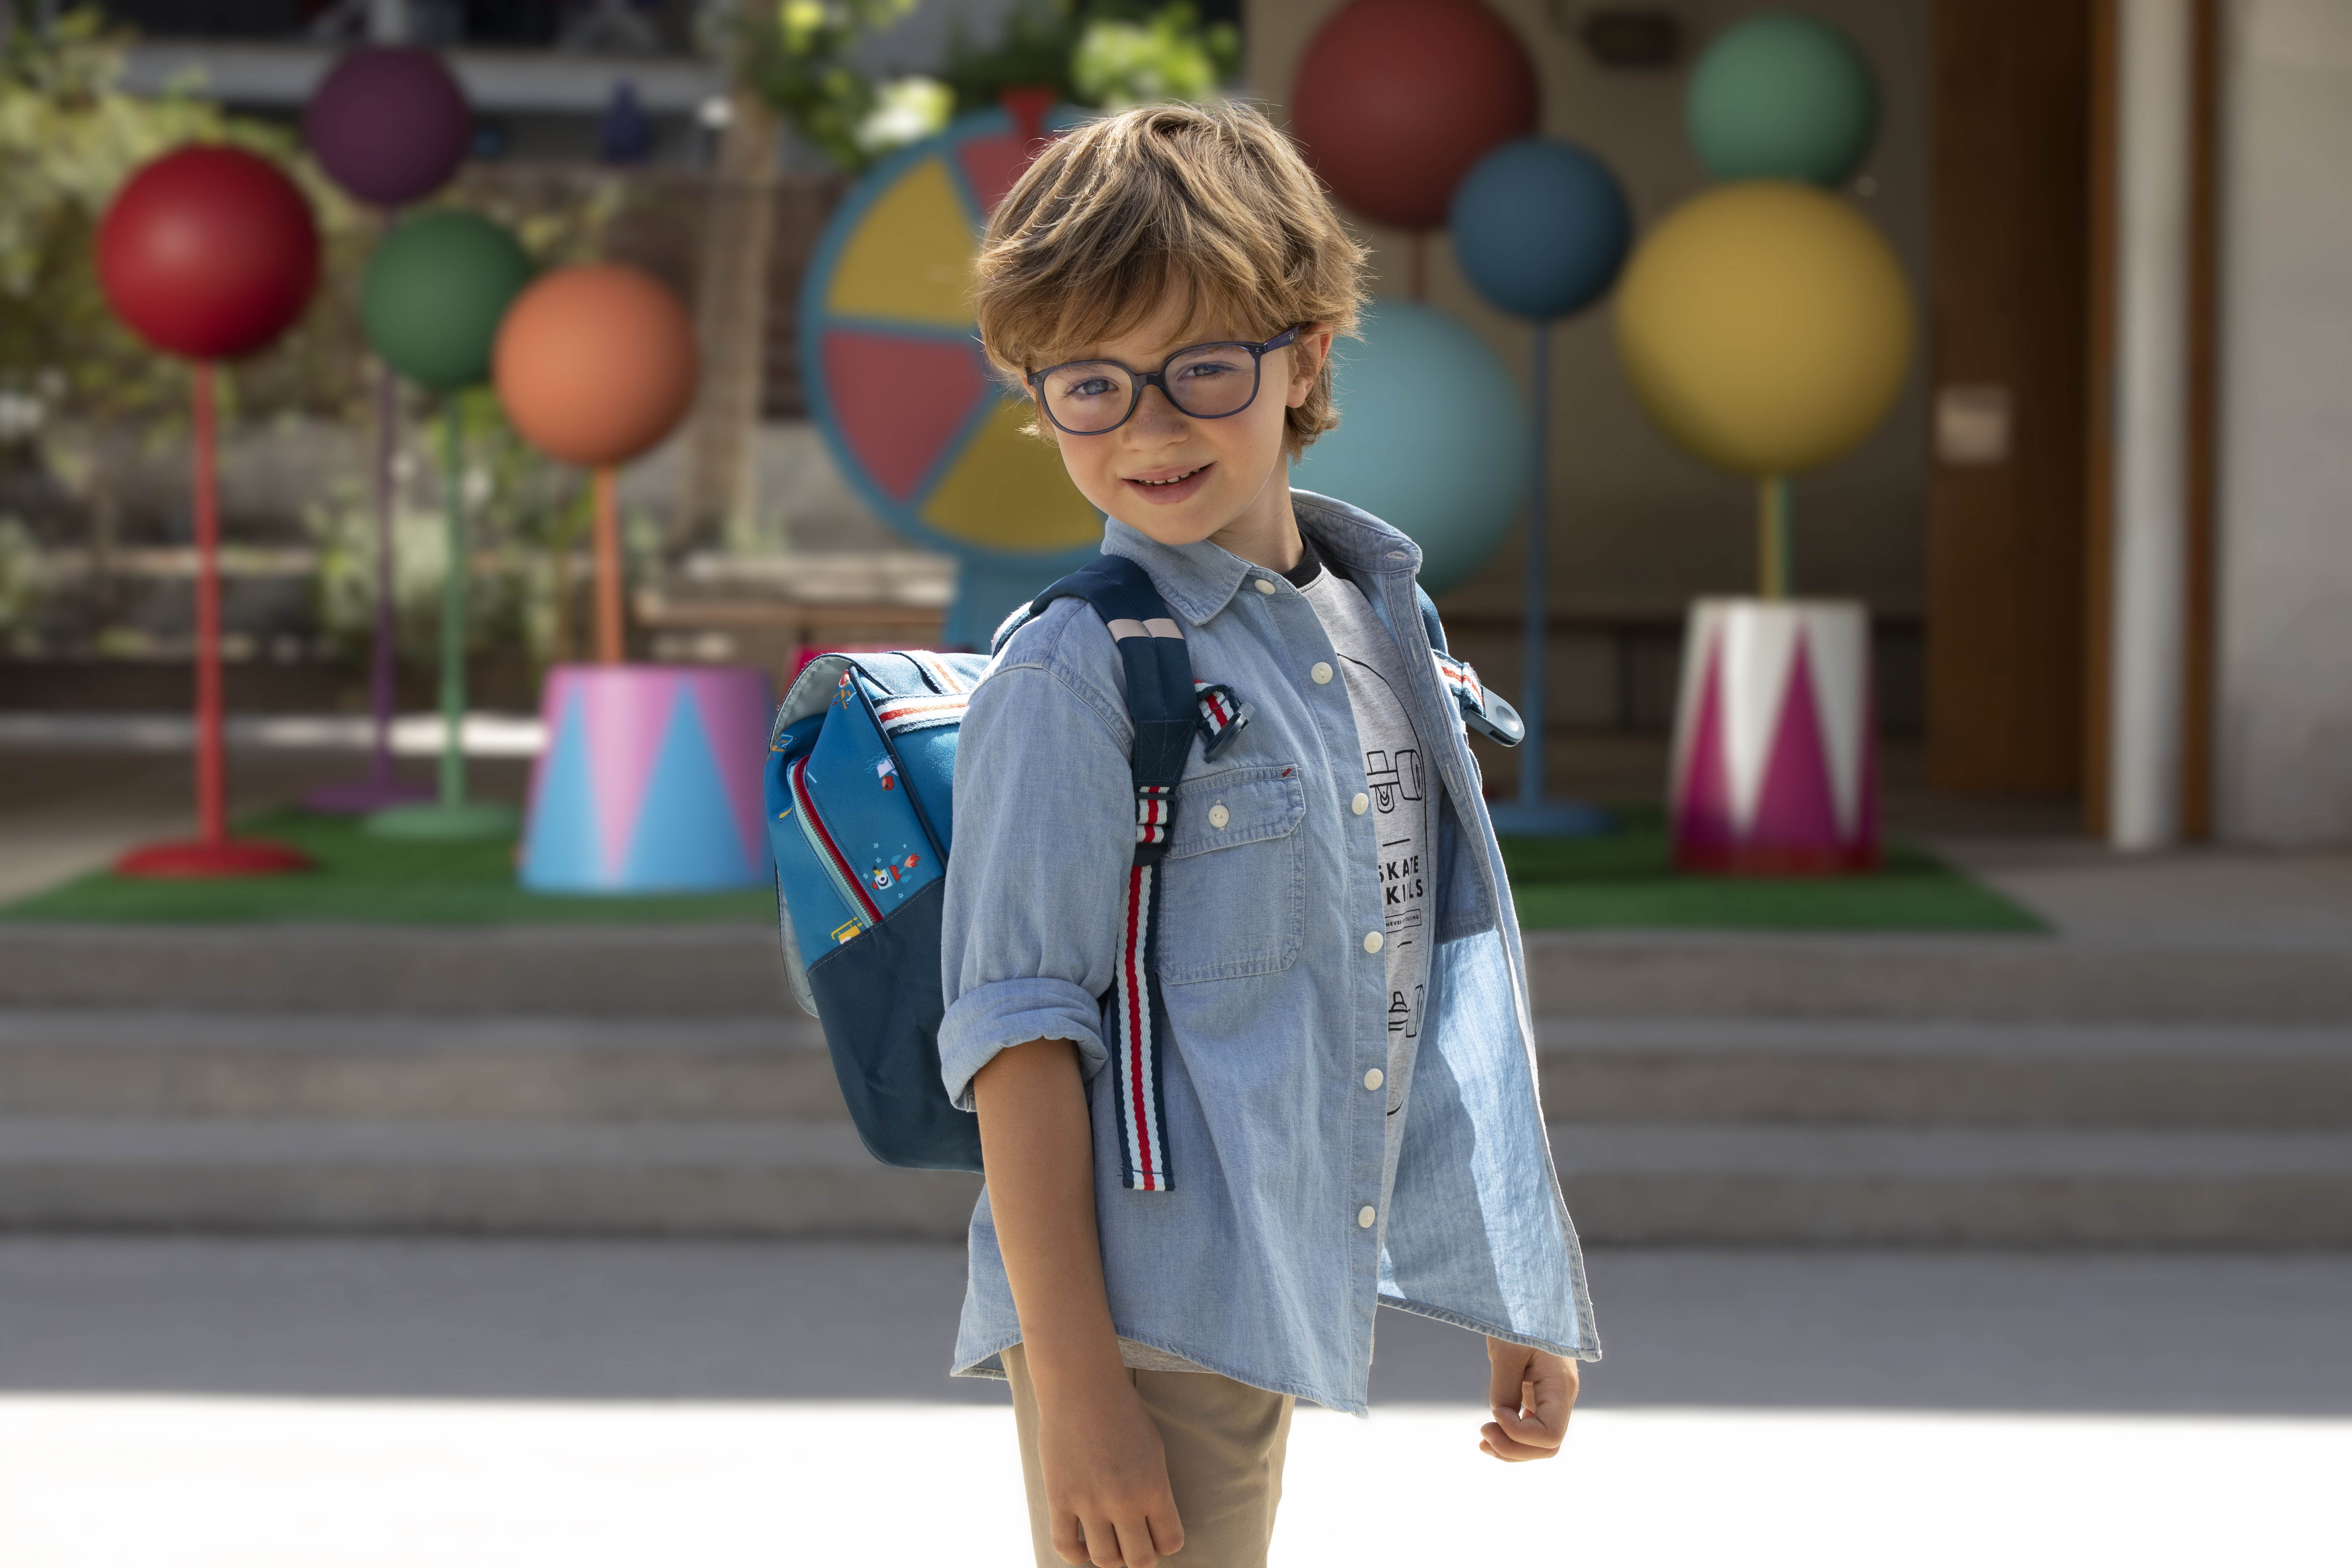 Child with a backpack wearing glasses